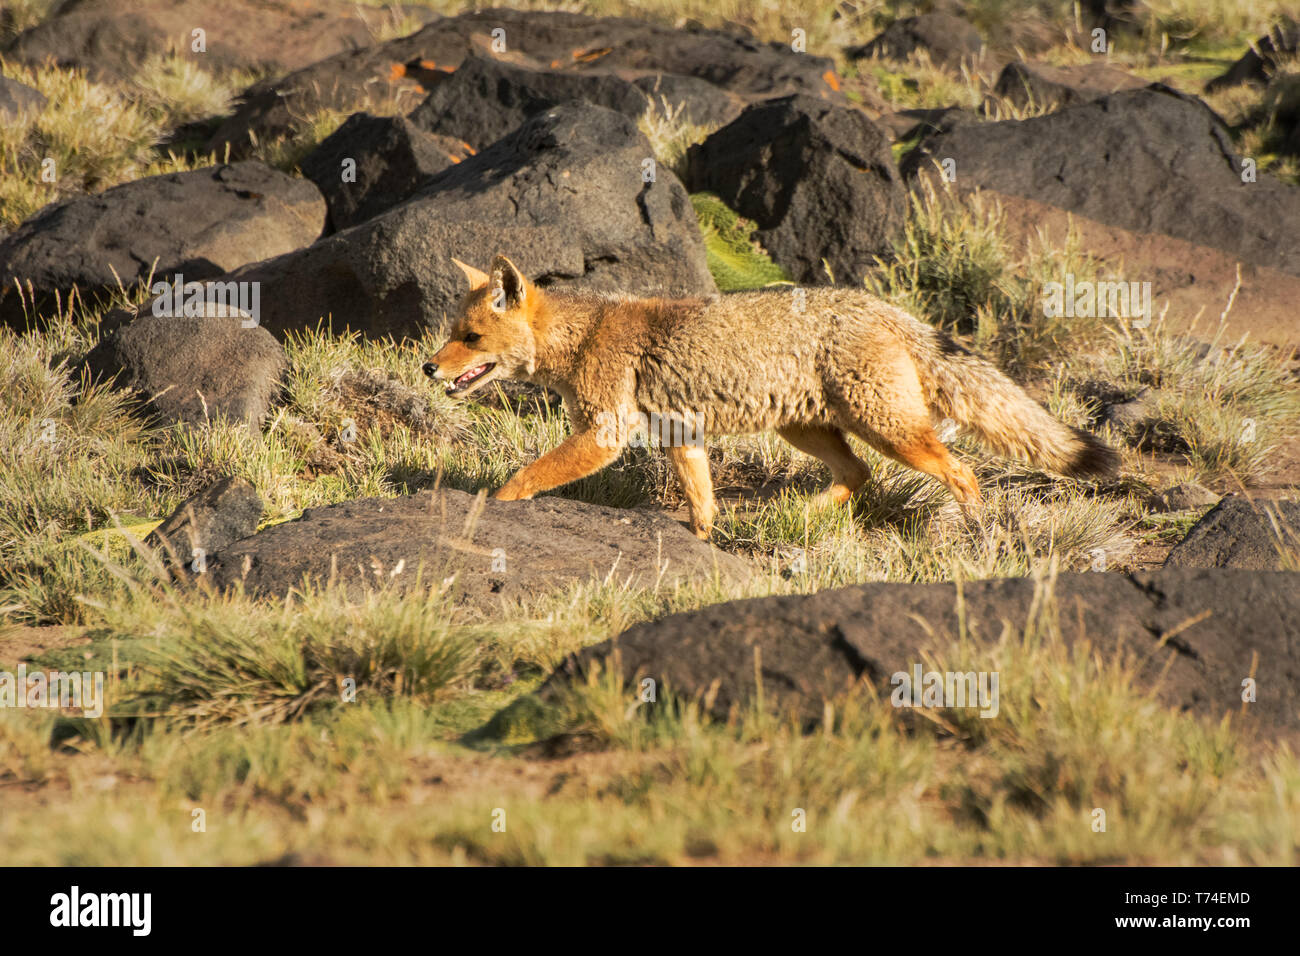 A Patagonian fox (Lycalopex griseus) is running across the image from right to left in the warm light of a late afternoon; Mendoza, Argentina Stock Photo